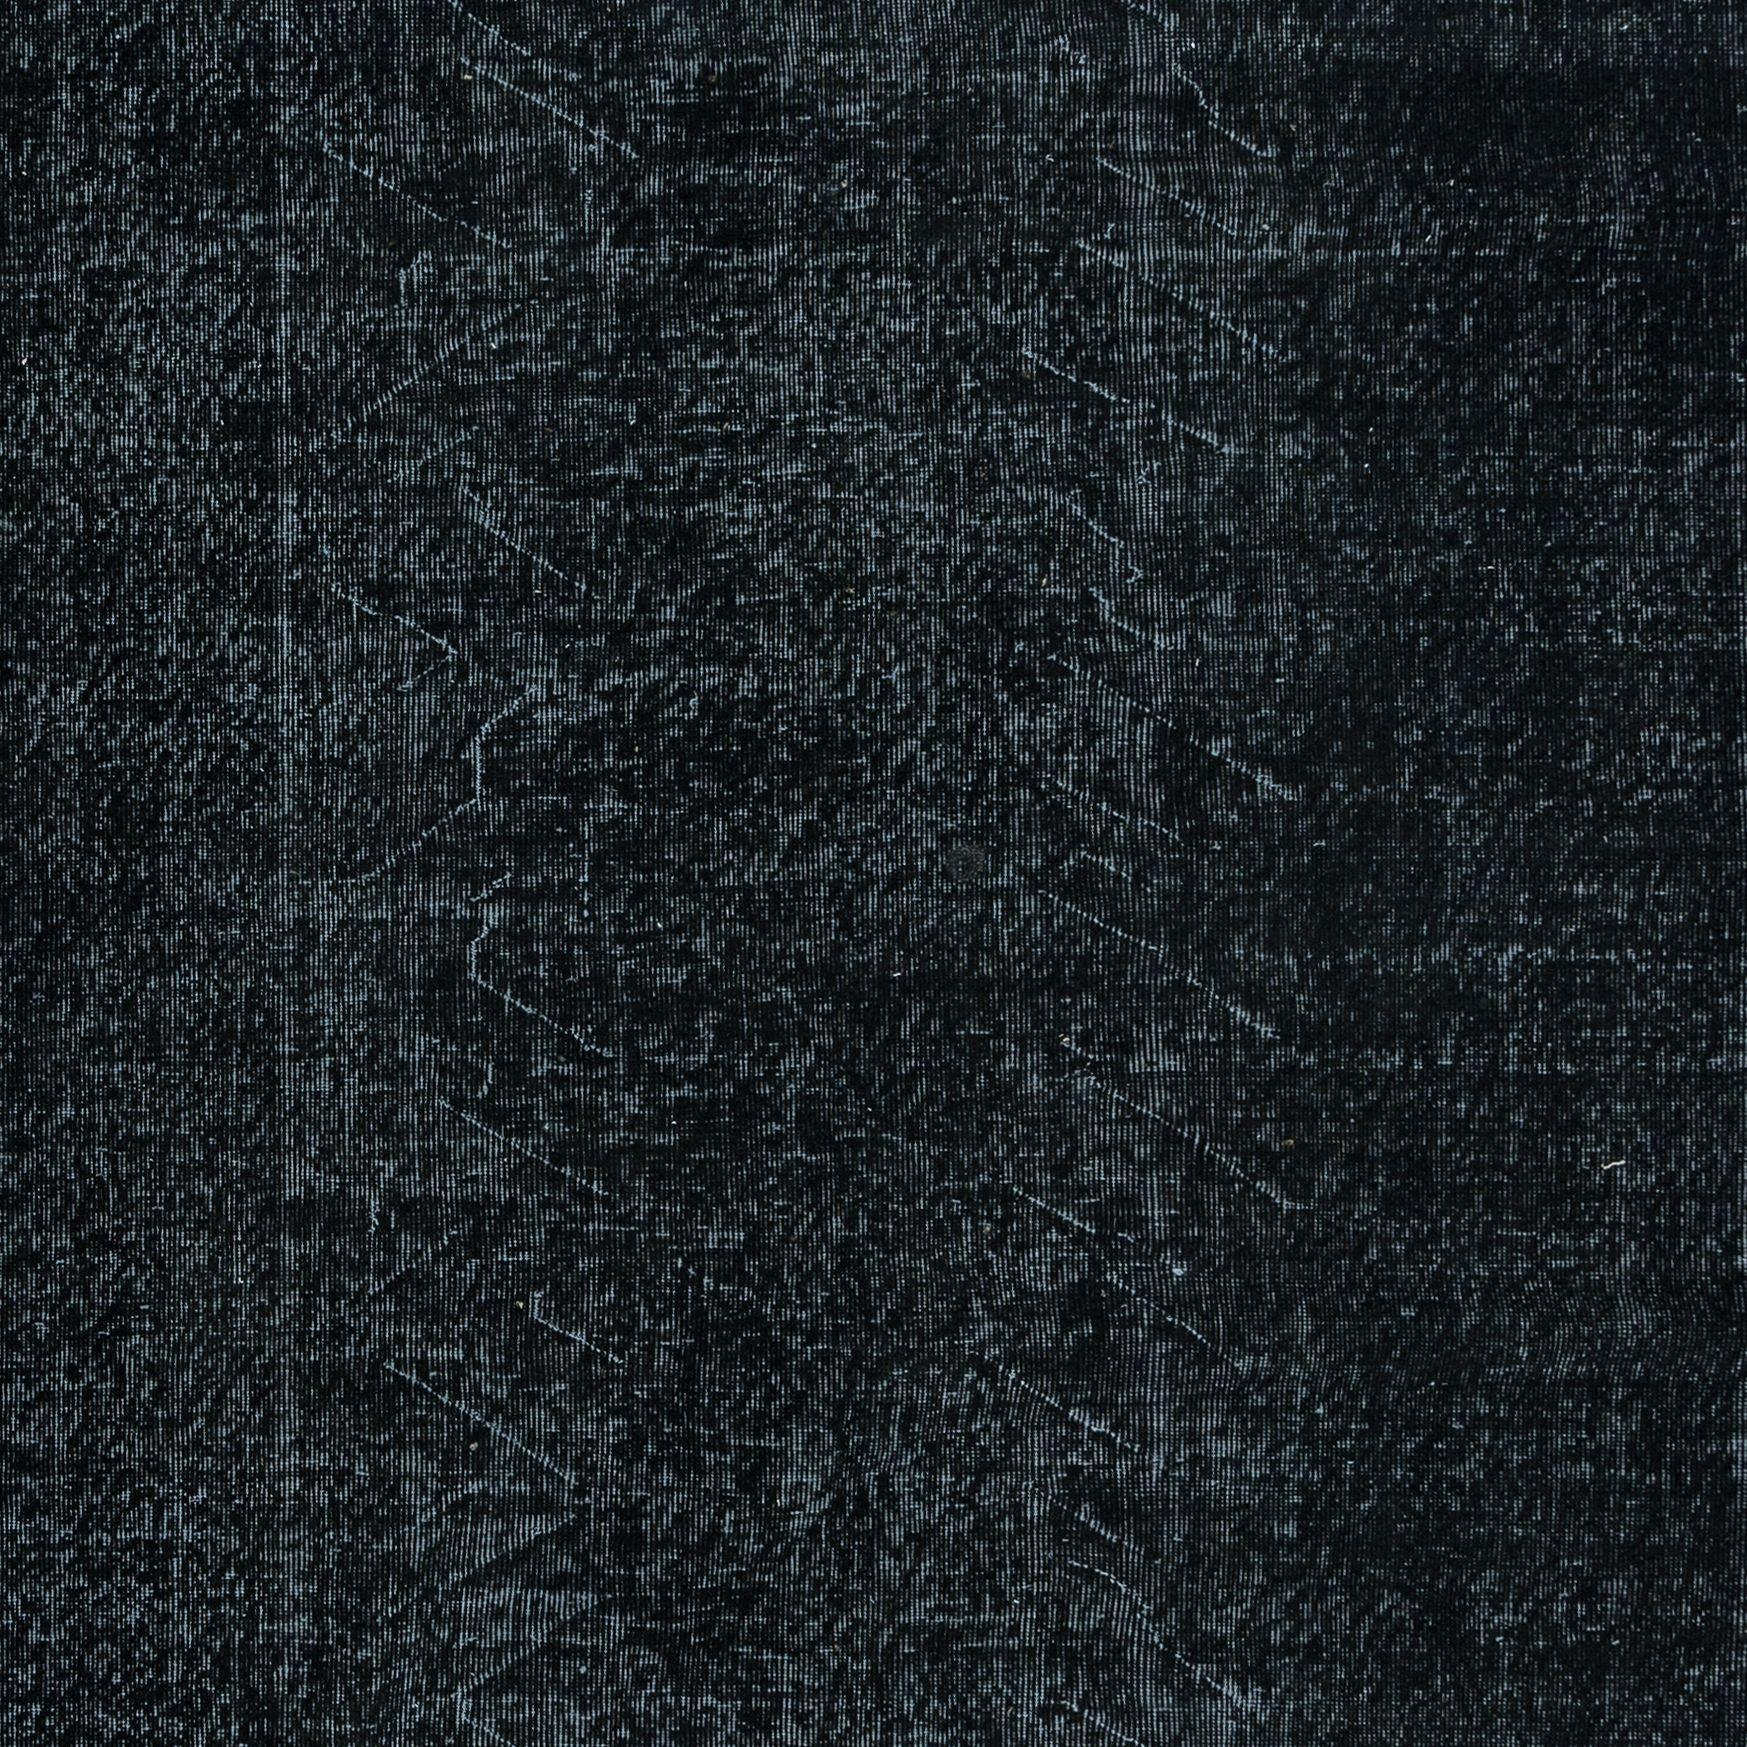 Hand-Woven 6.4x9 Ft Plain Black Area Rug, Handknotted and Handwoven in Isparta, Turkey For Sale